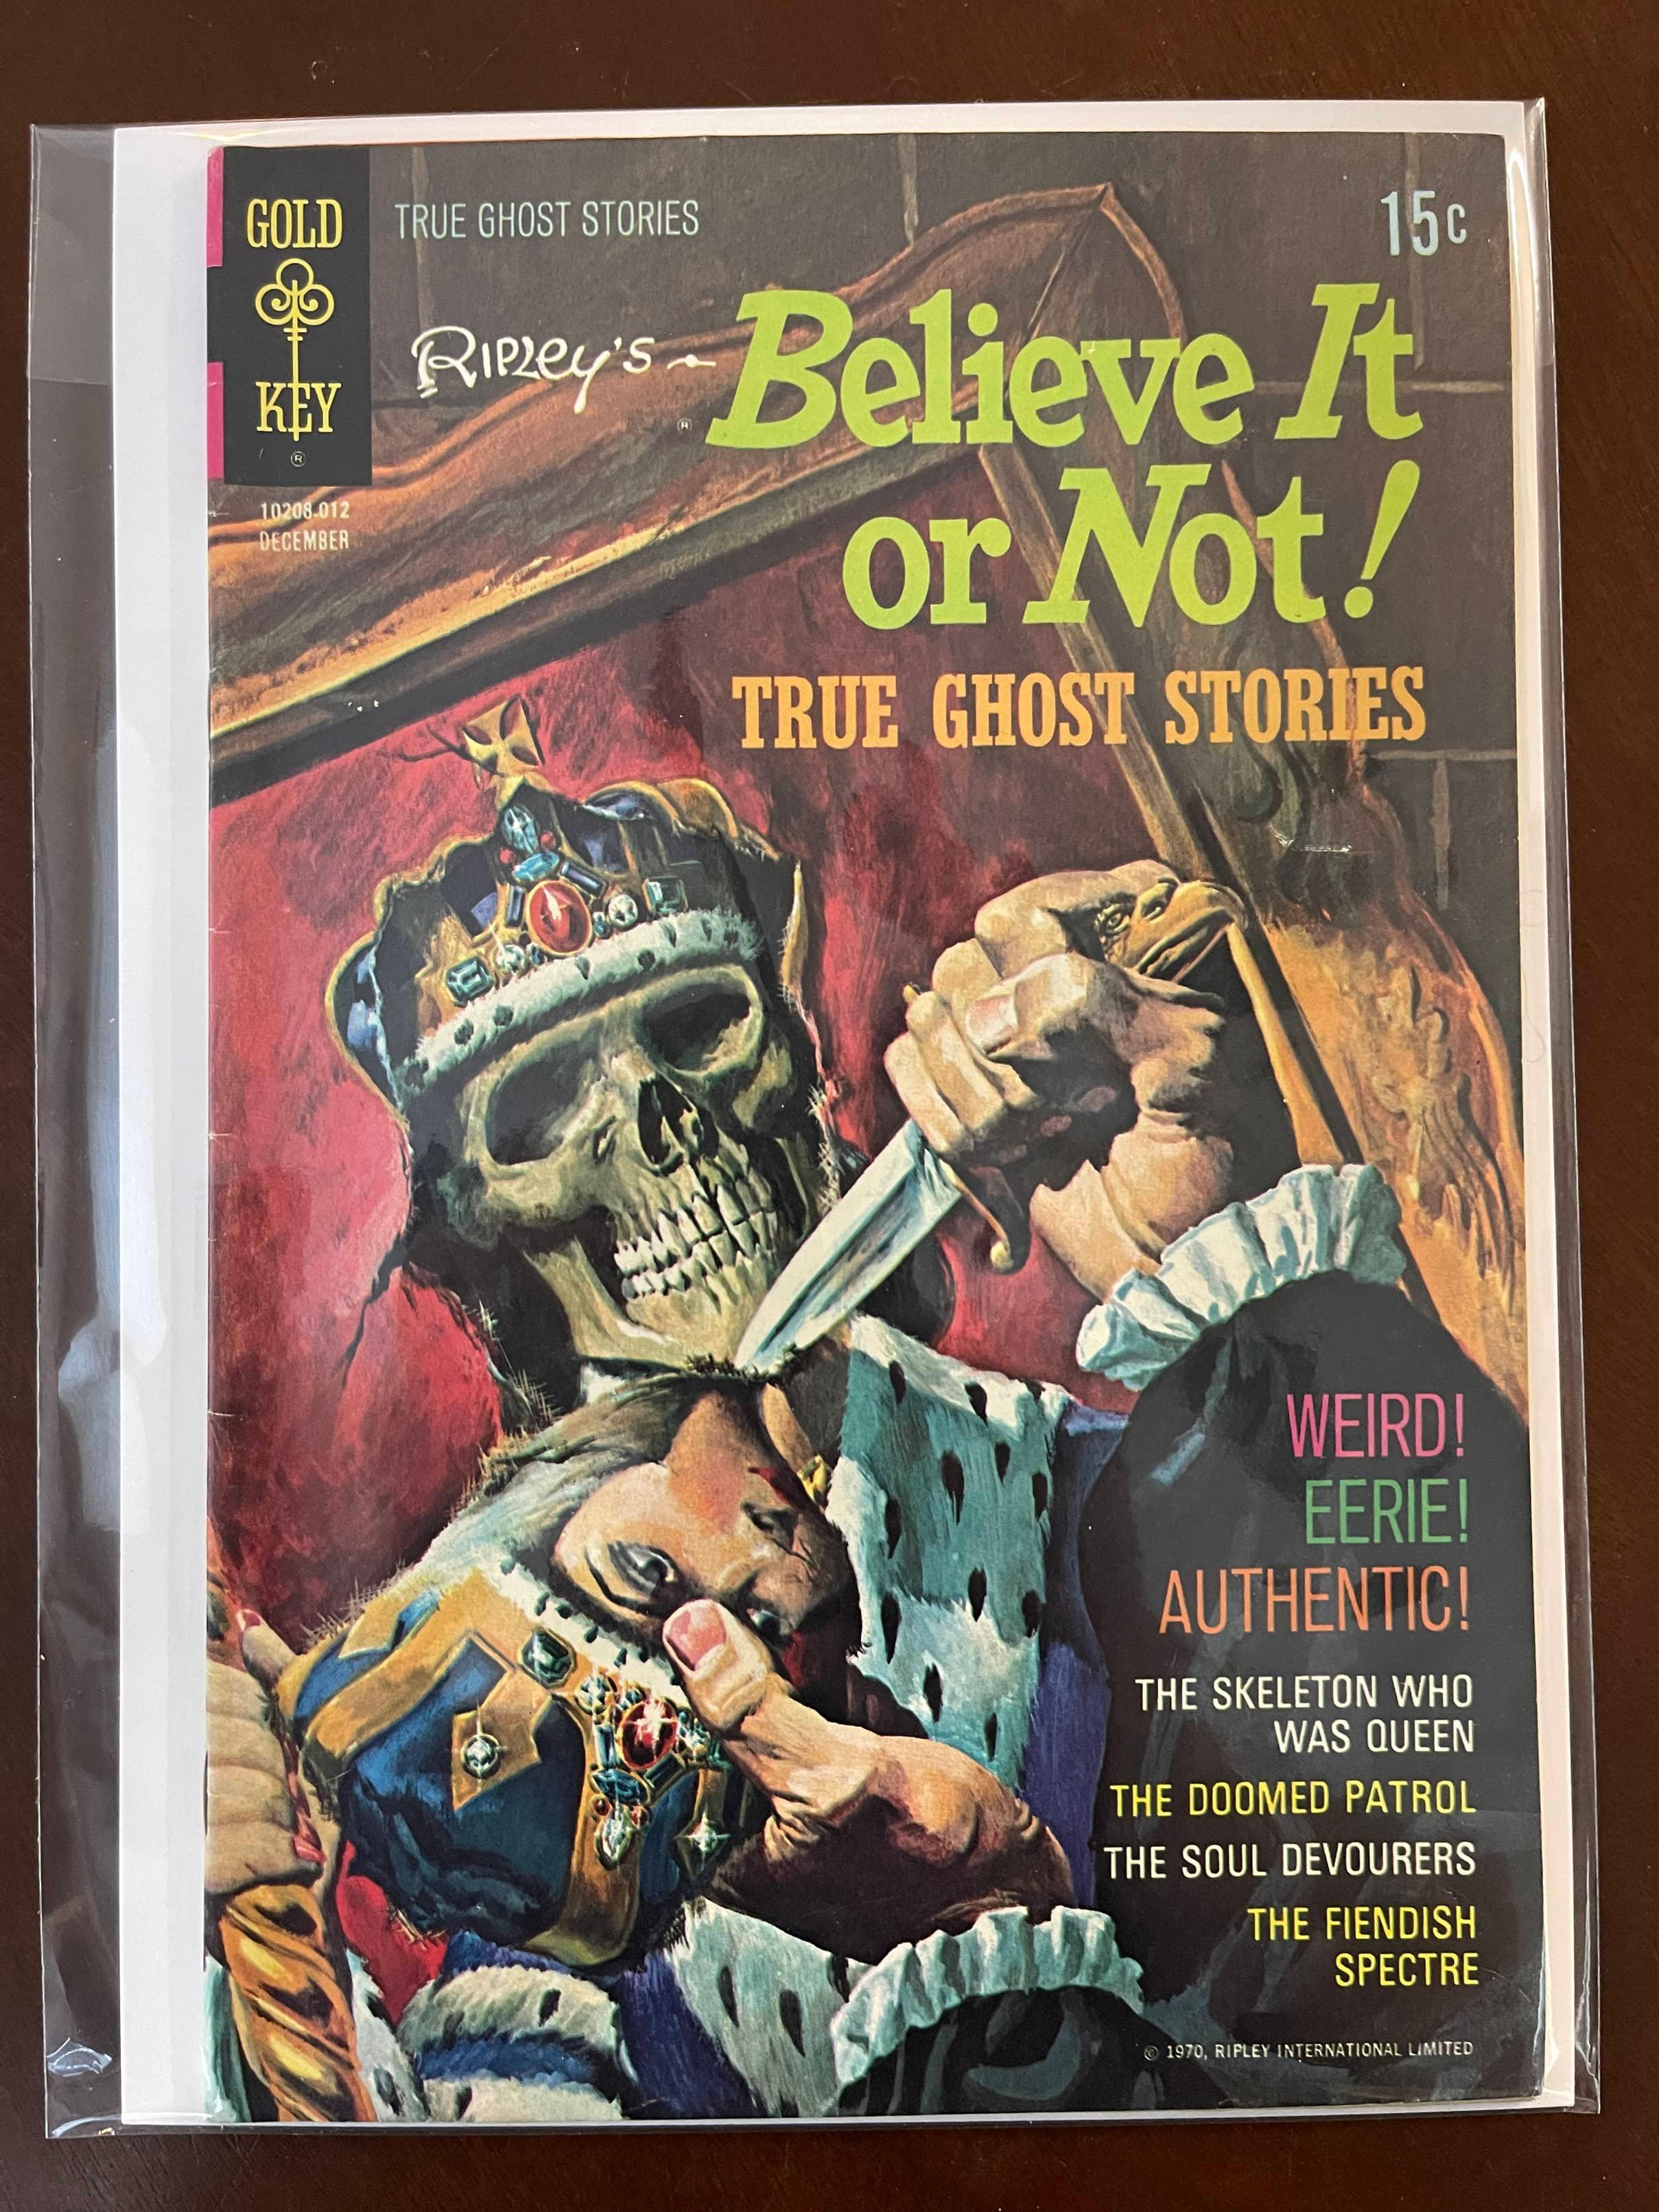 Ripleys Believe it or Not Comic #23 Gold Key 1970 Bronze Age True Ghost Stories 15 Cent